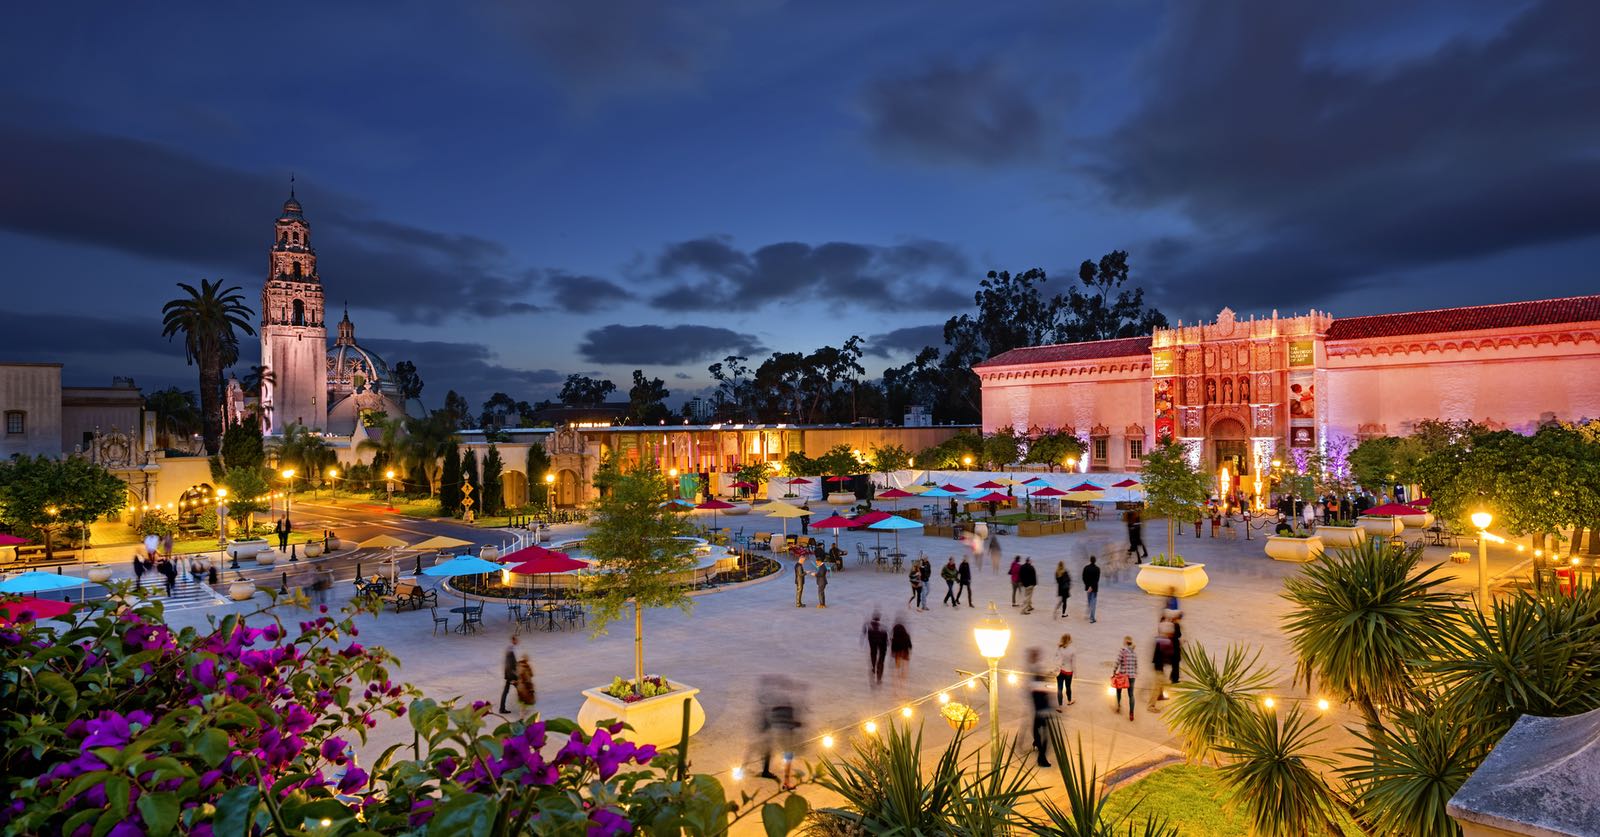 Balboa Park Museums after dark in San Diego